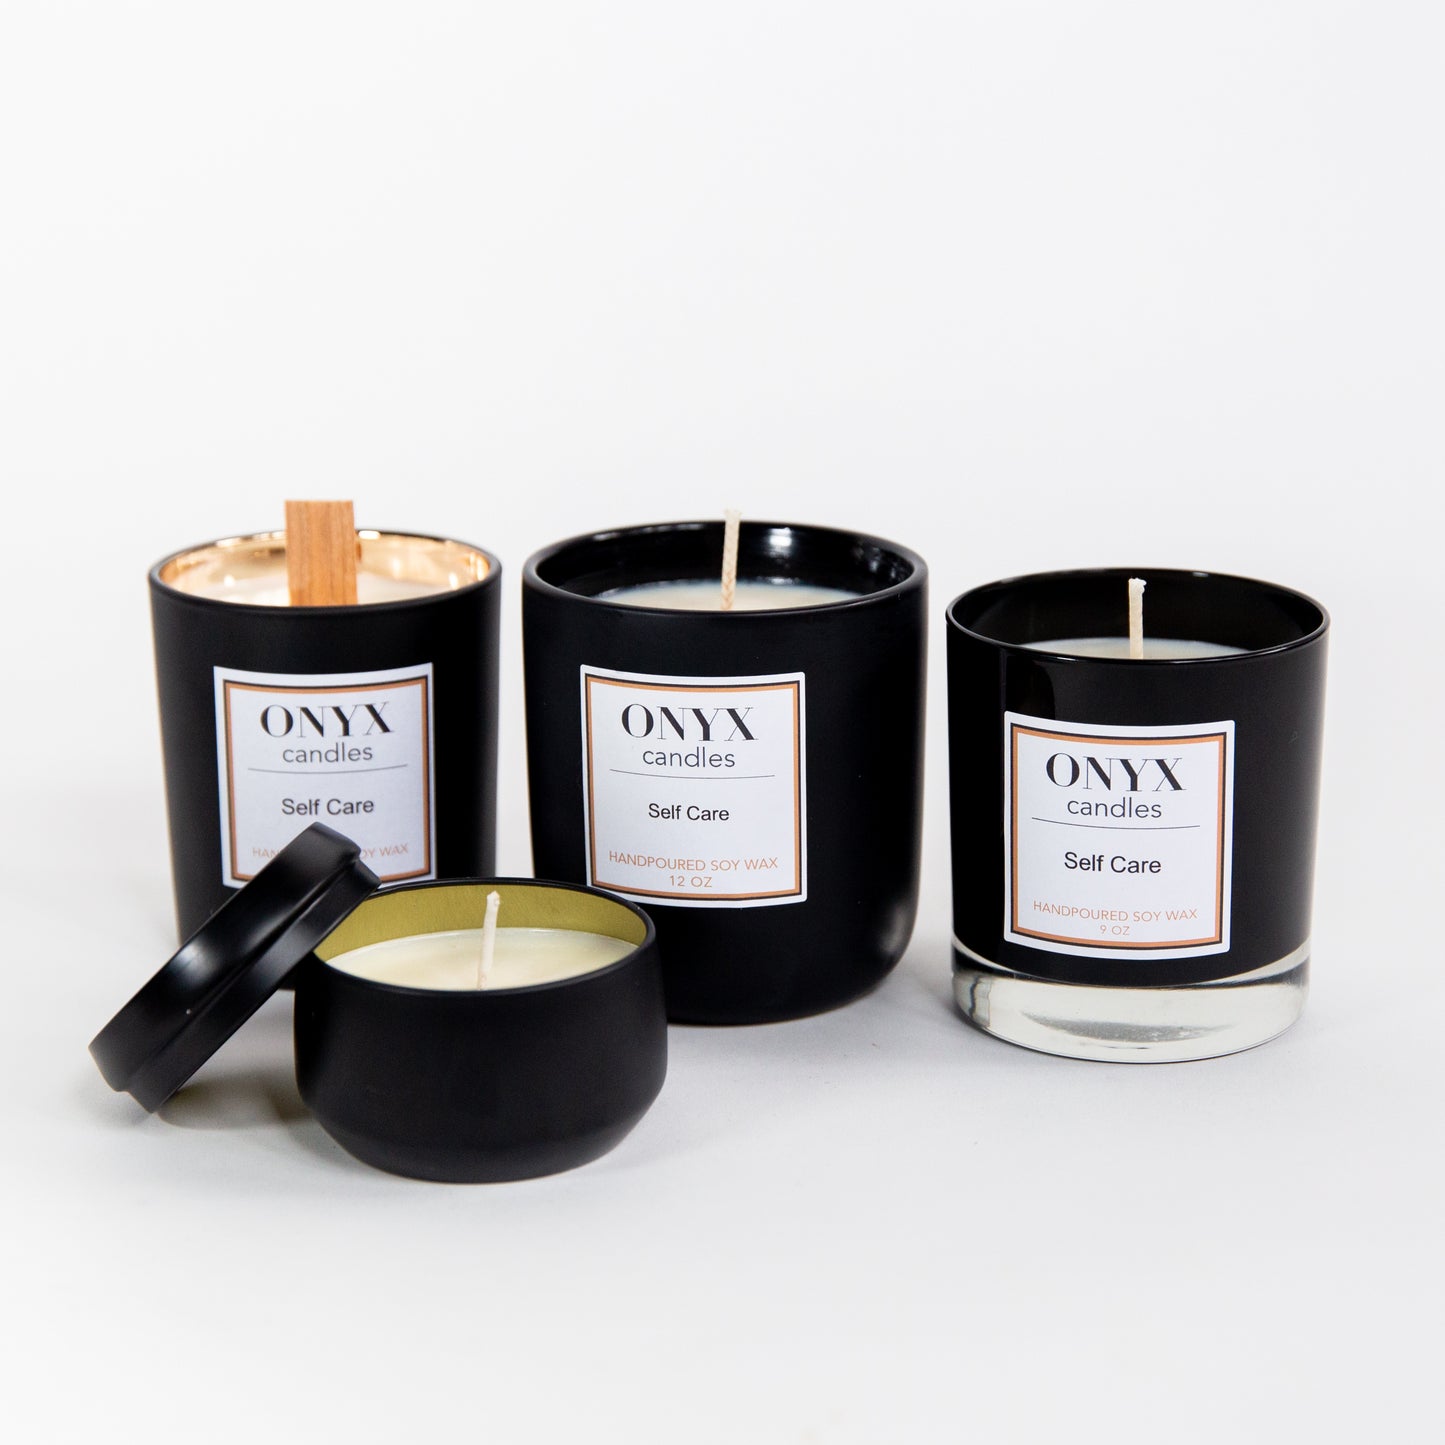 Self Care scented candles in 4 size options